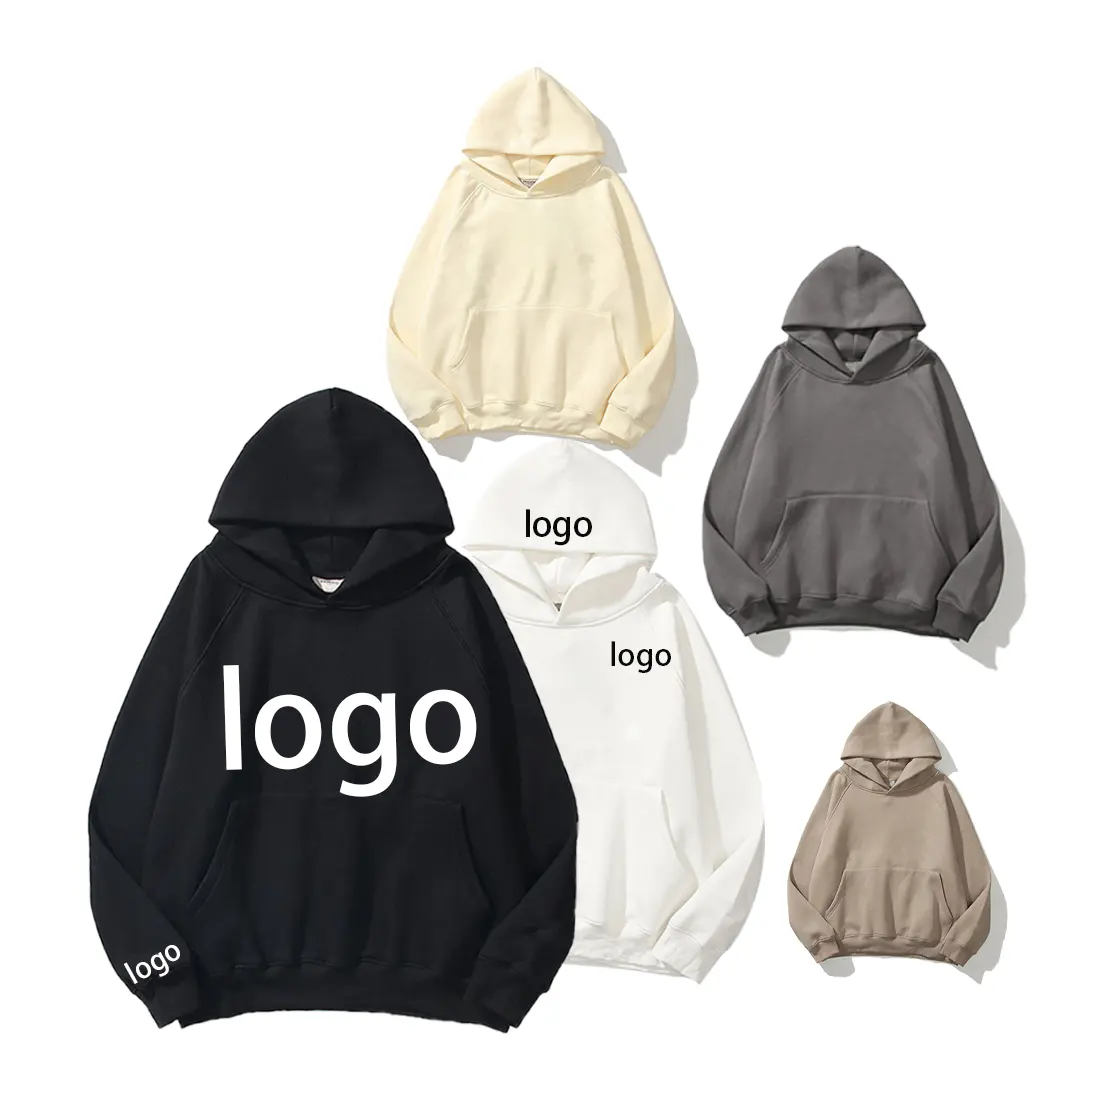 Cheap brand High Quality Hoodies Sweatshirts Polyester Oversize Sweater Blank Sublimation Hoodies For Diy Printing